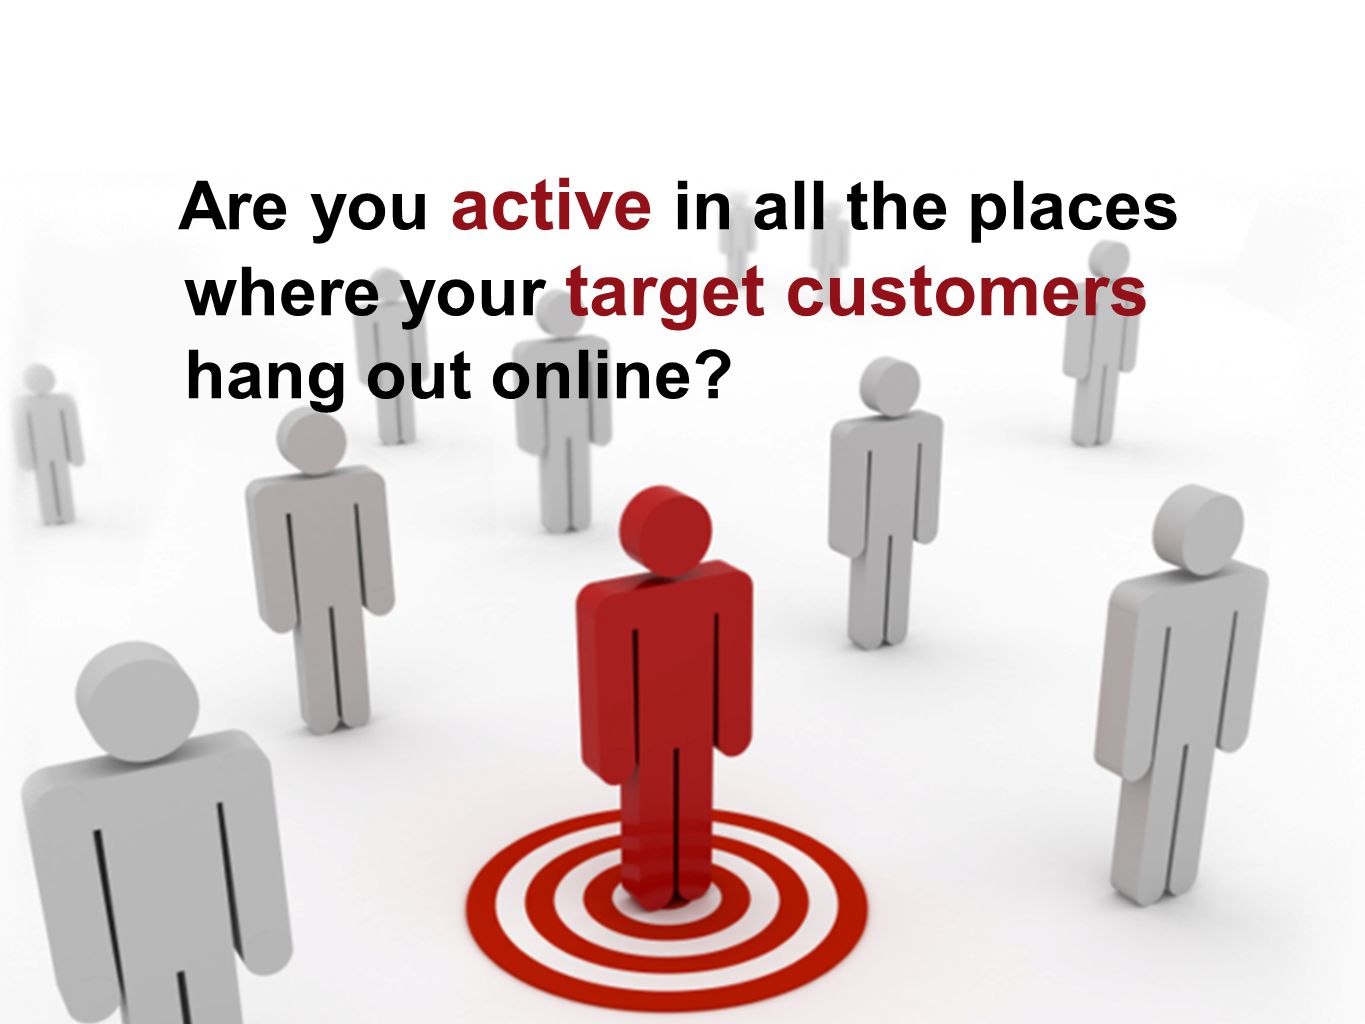 Are you active in all the places where your target customers hang out online